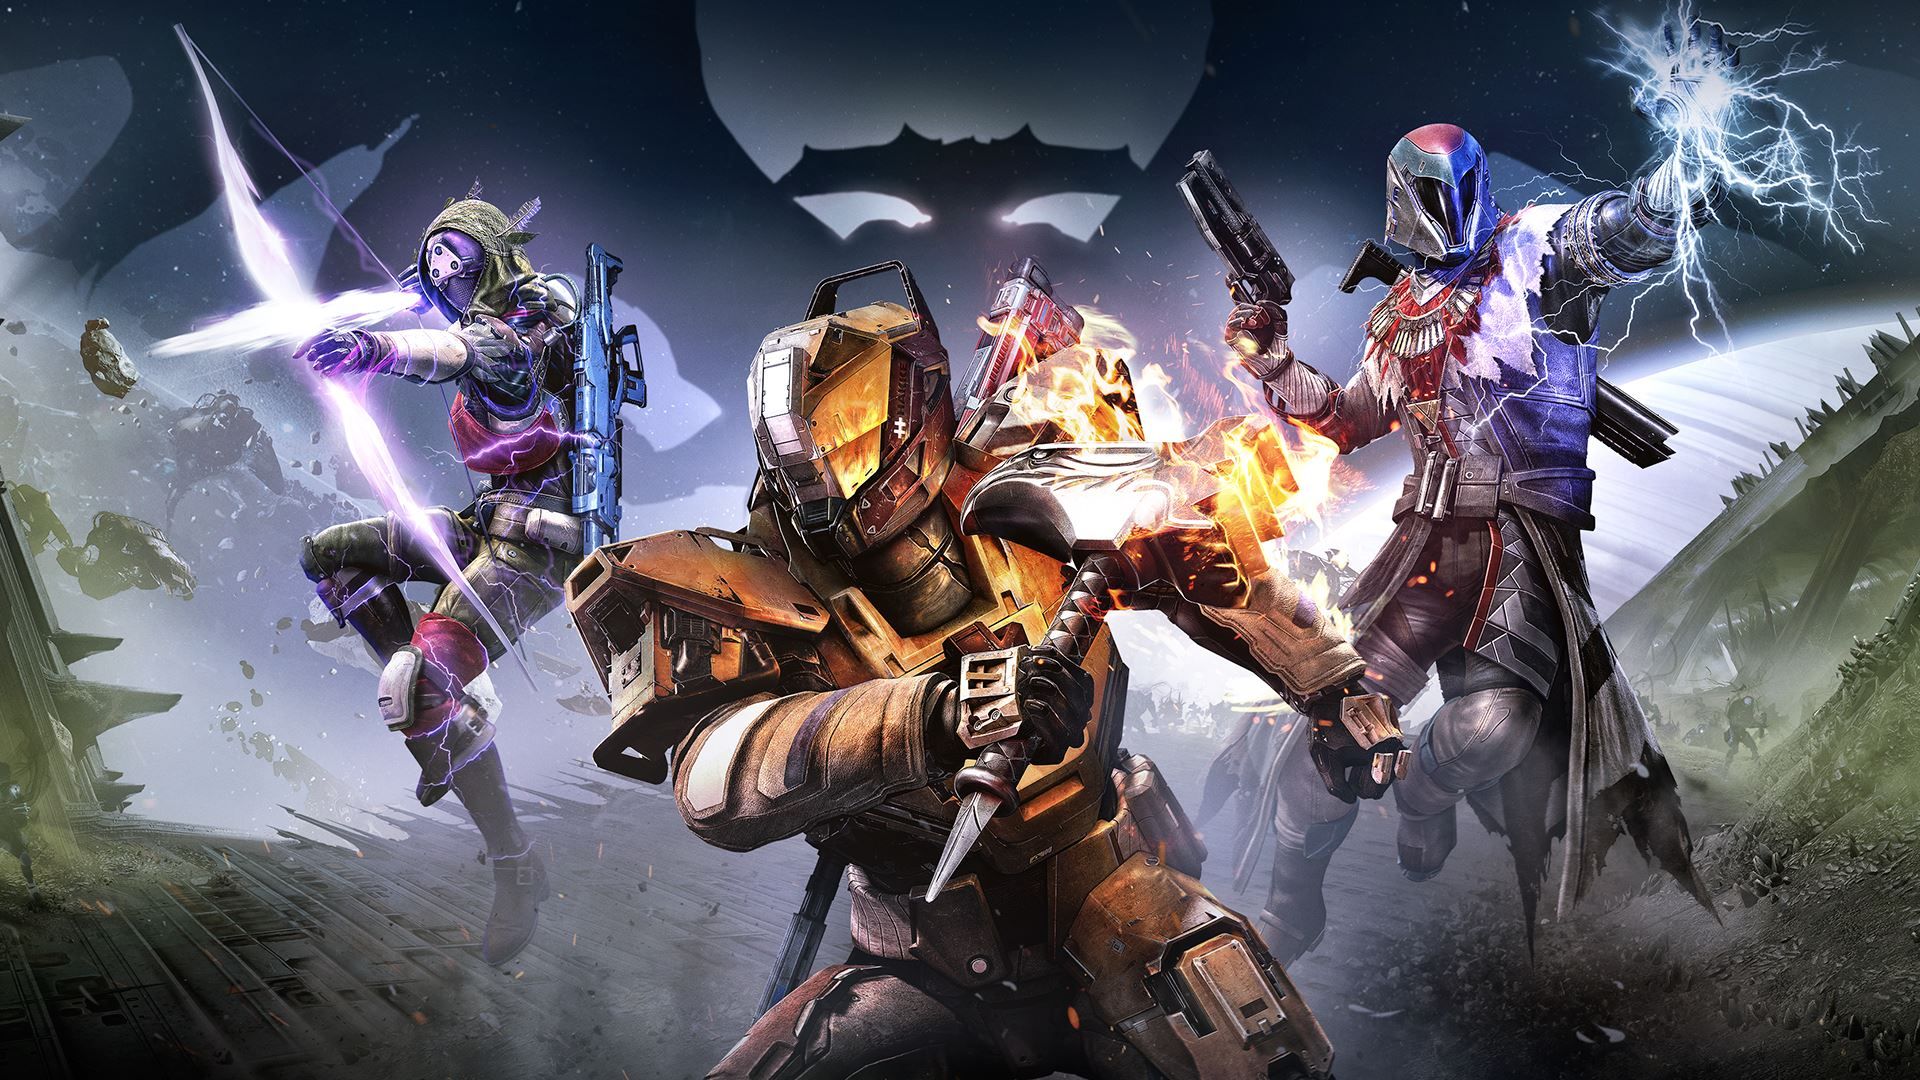 Destiny The Taken King Releae Date Details and Controversy